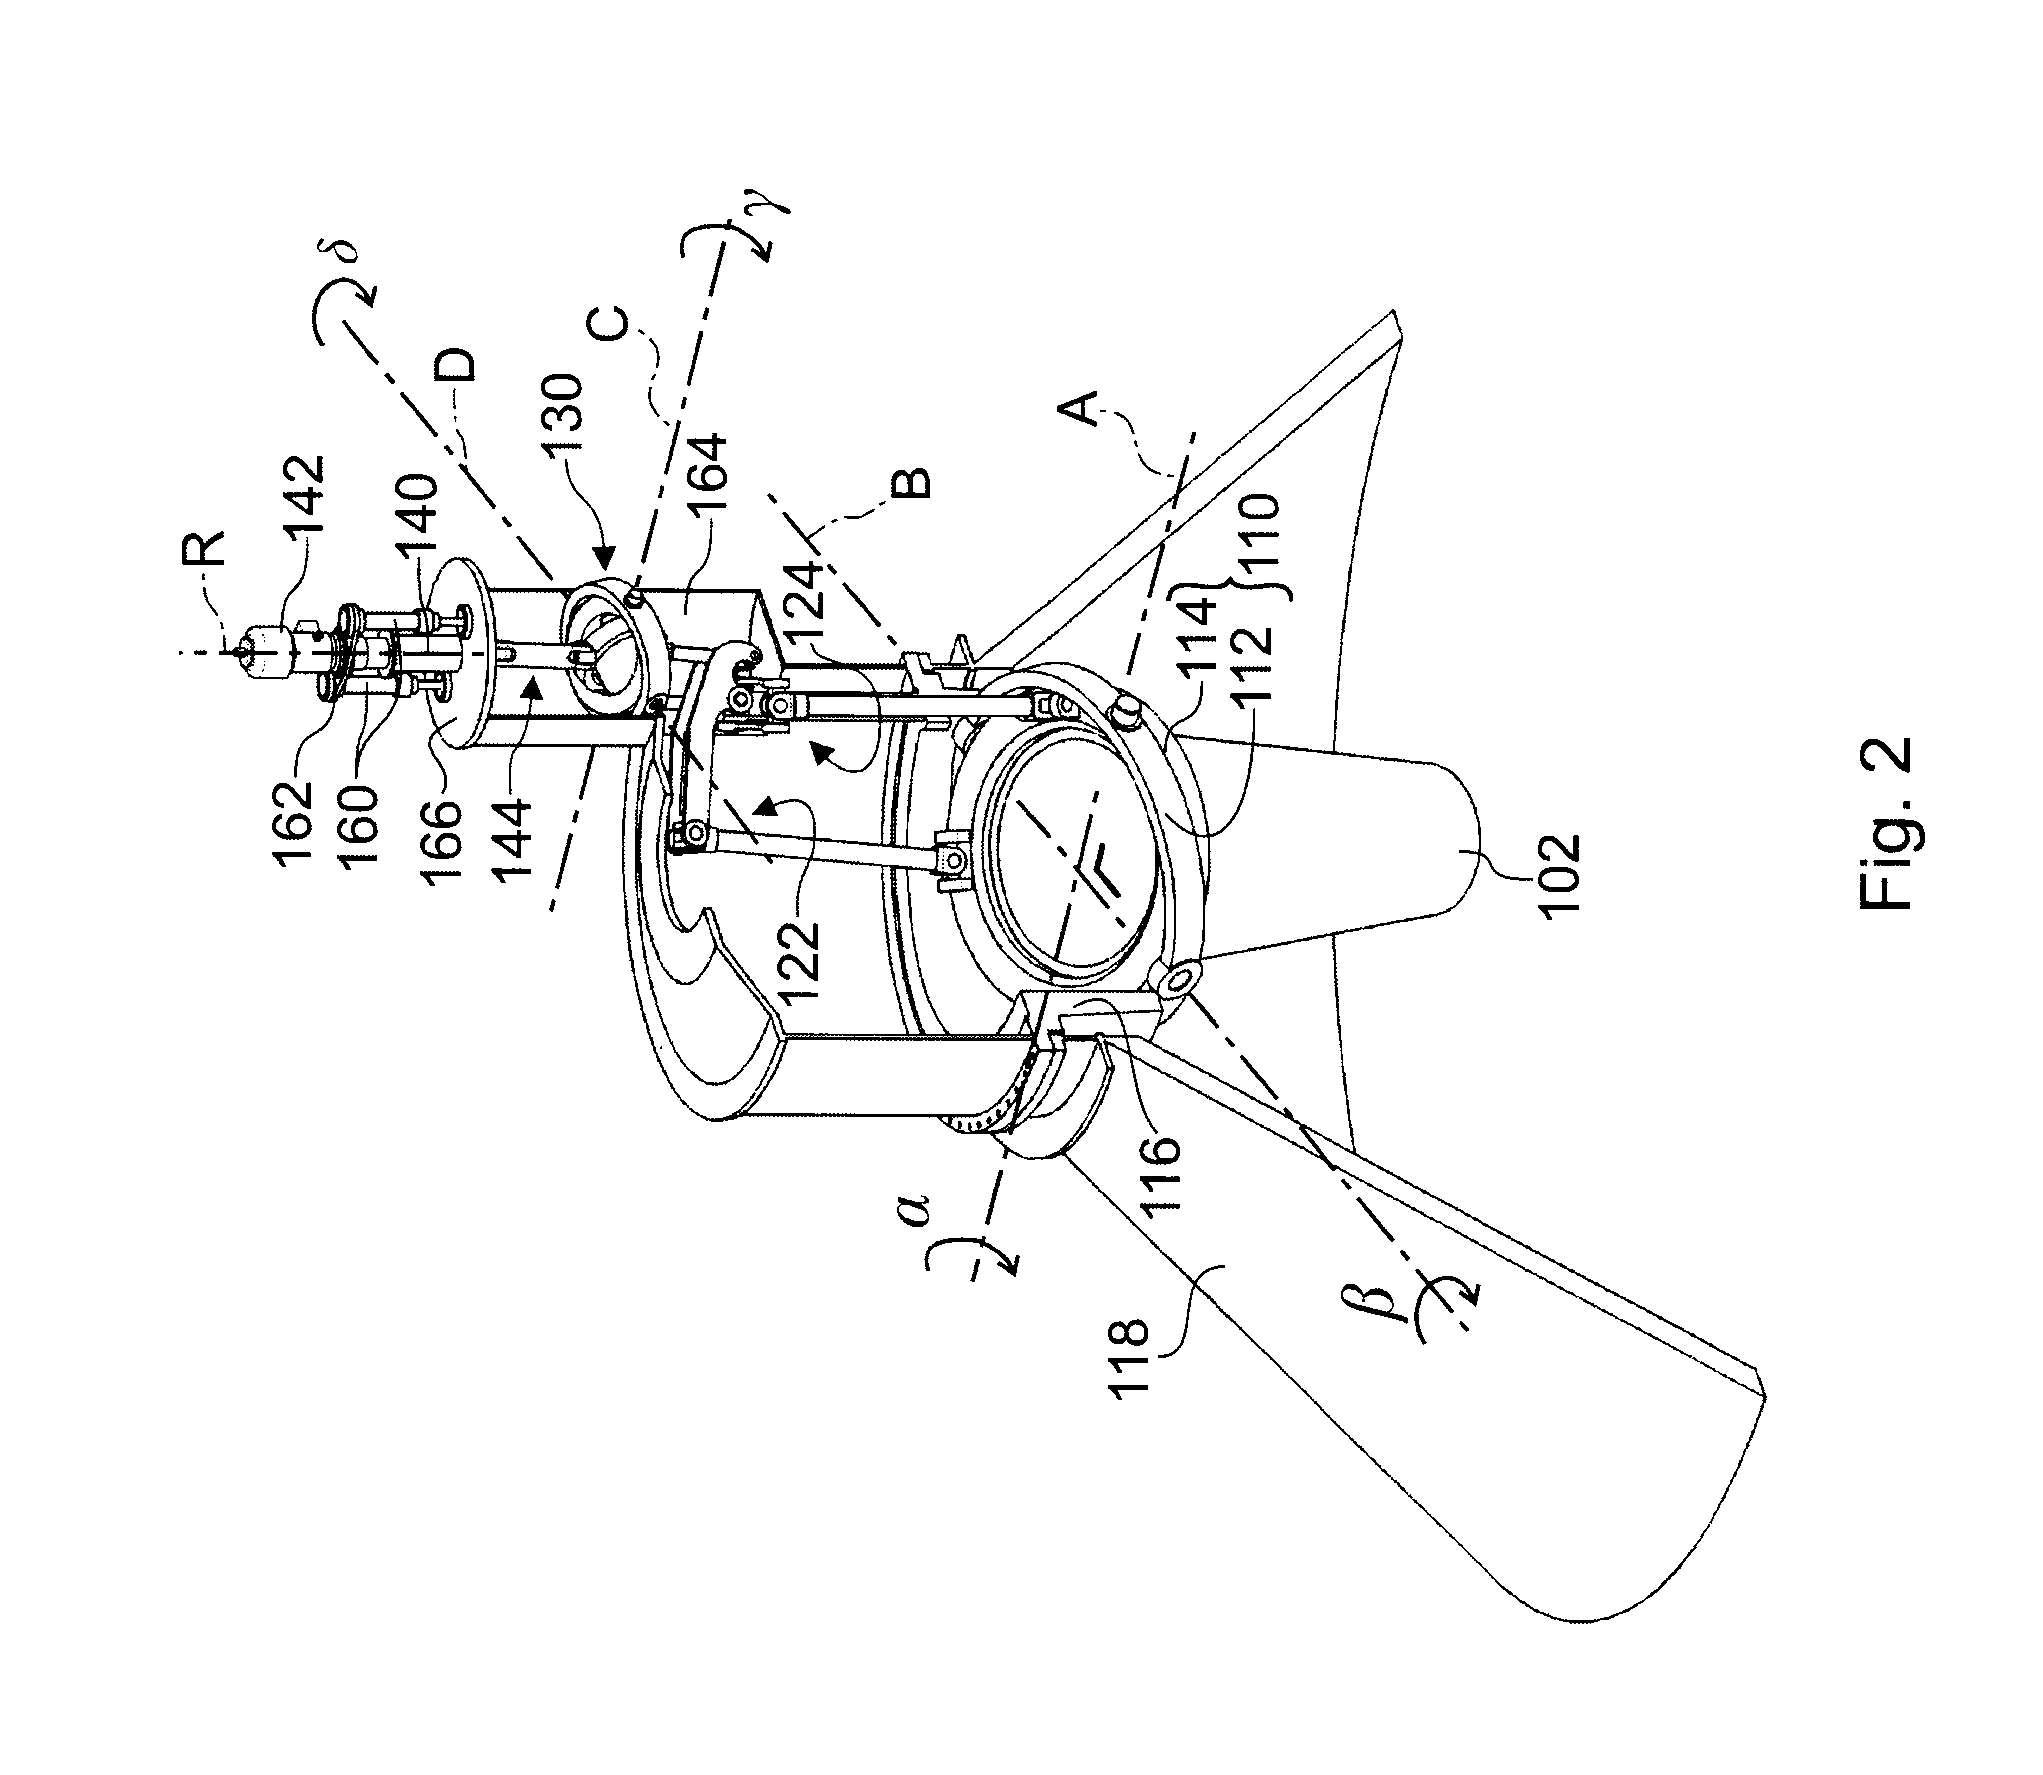 Device for distributing bulk material with a distribution spout supported by a cardan suspension